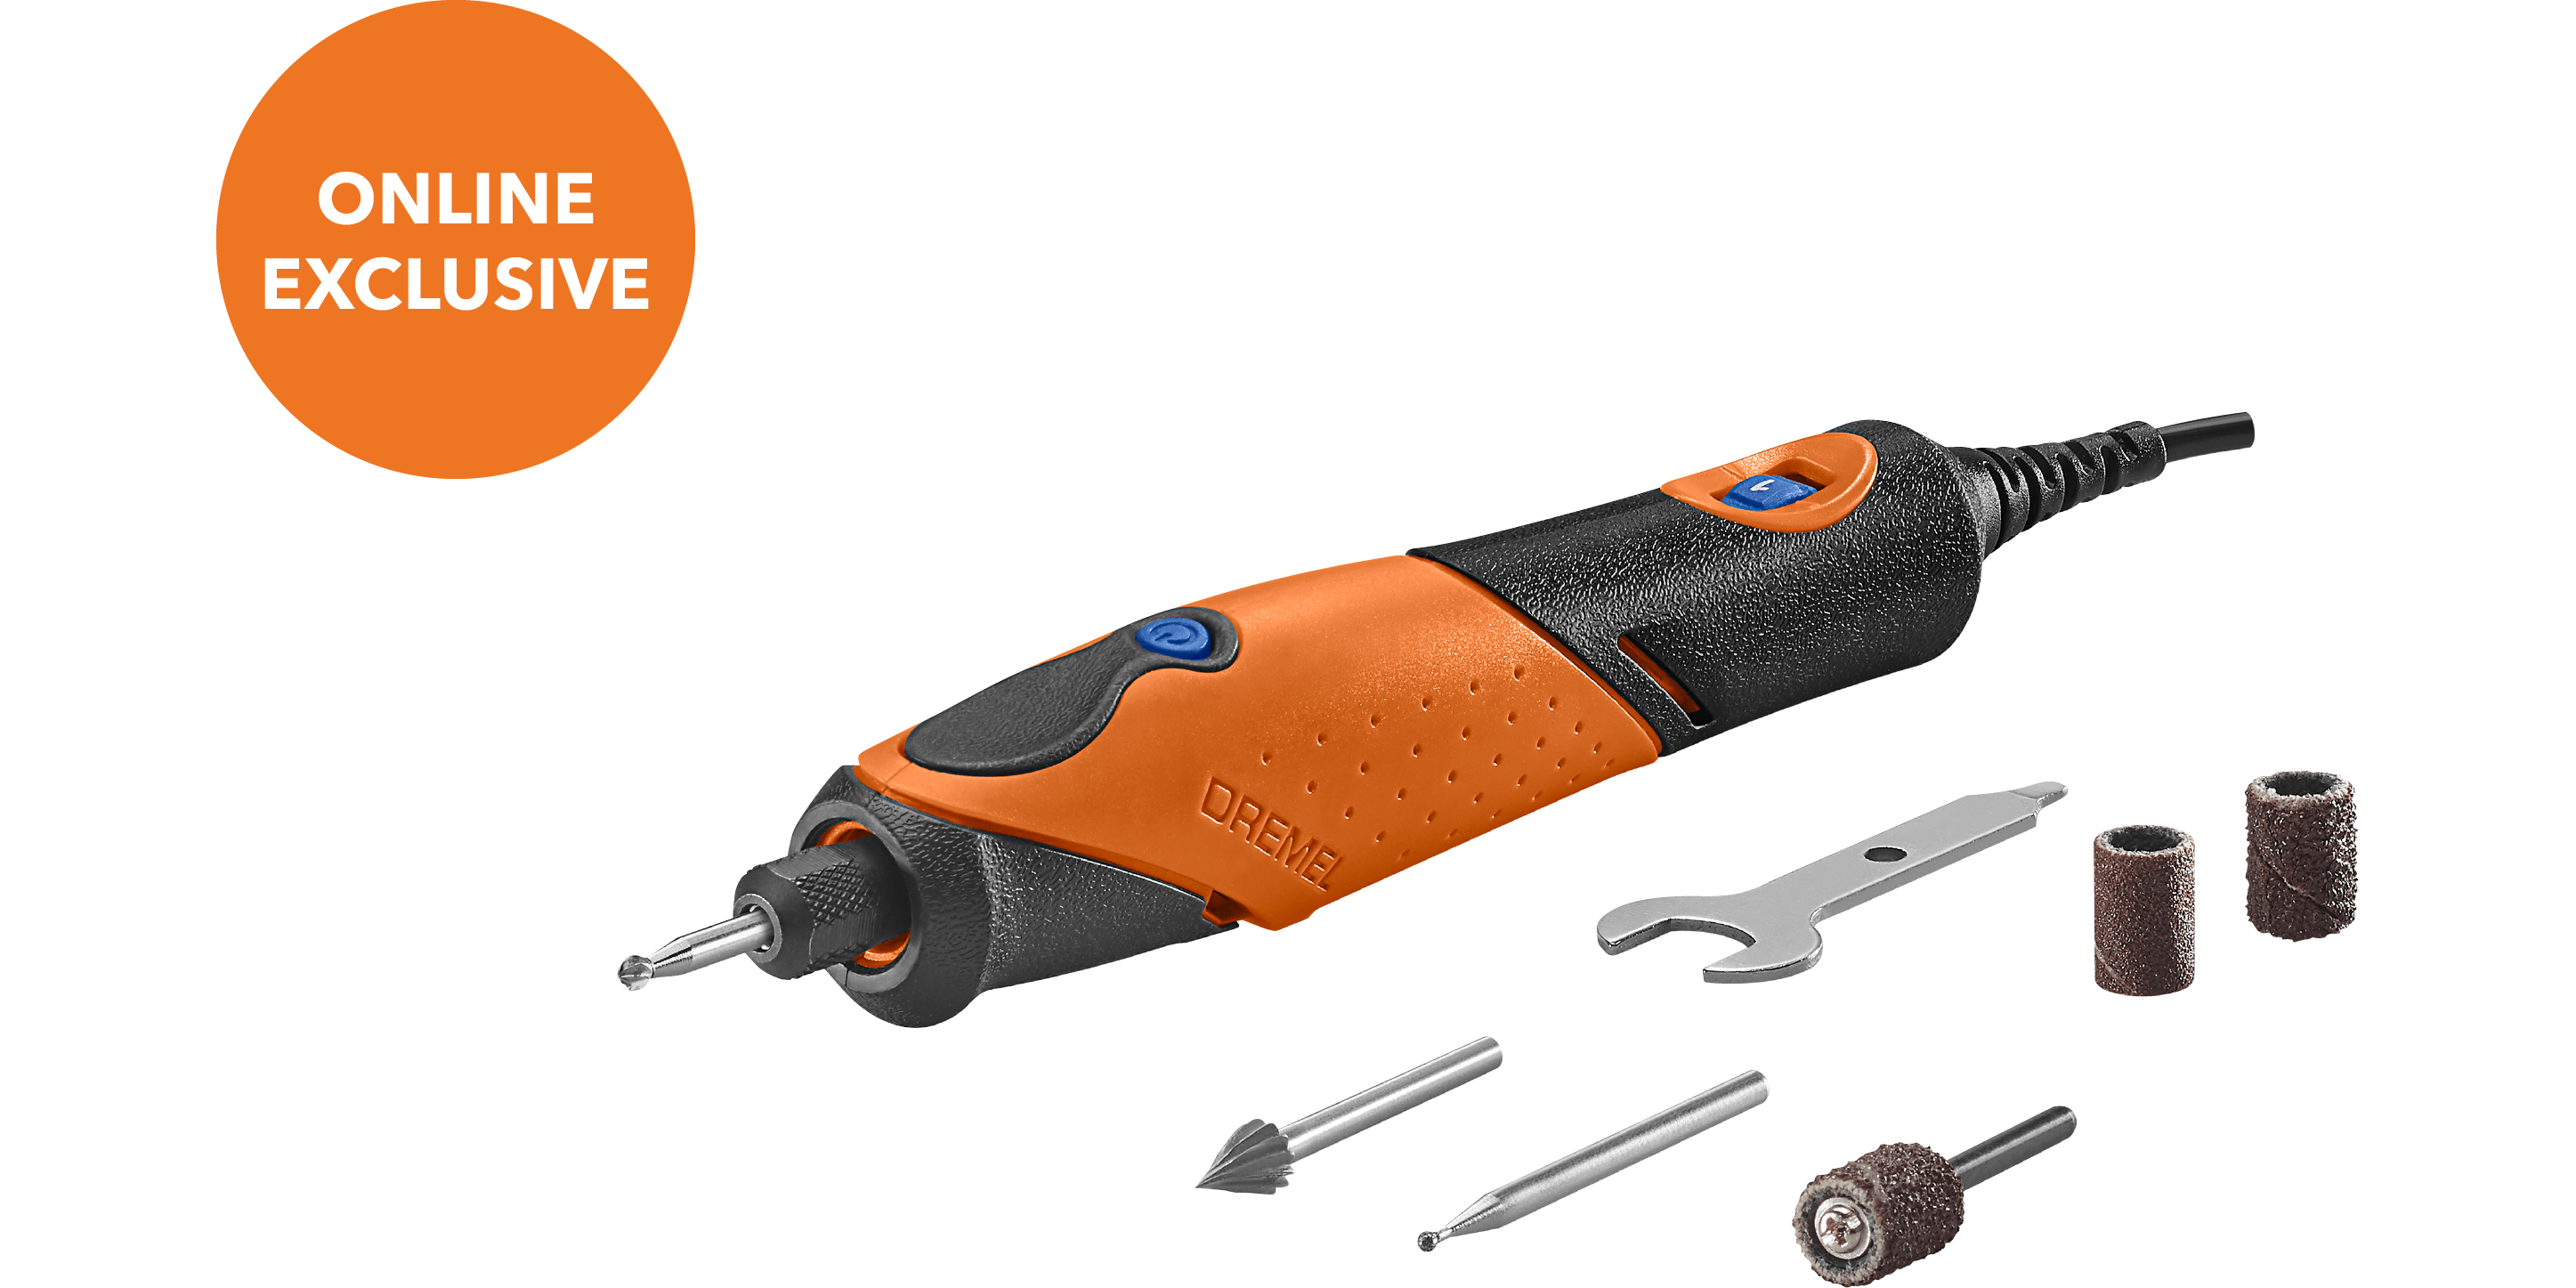 Dremel 2050-15 Stylo+ Versatile Craft Rotary Tool, Wood Carving Detail Tool  with Keyless Chuck 